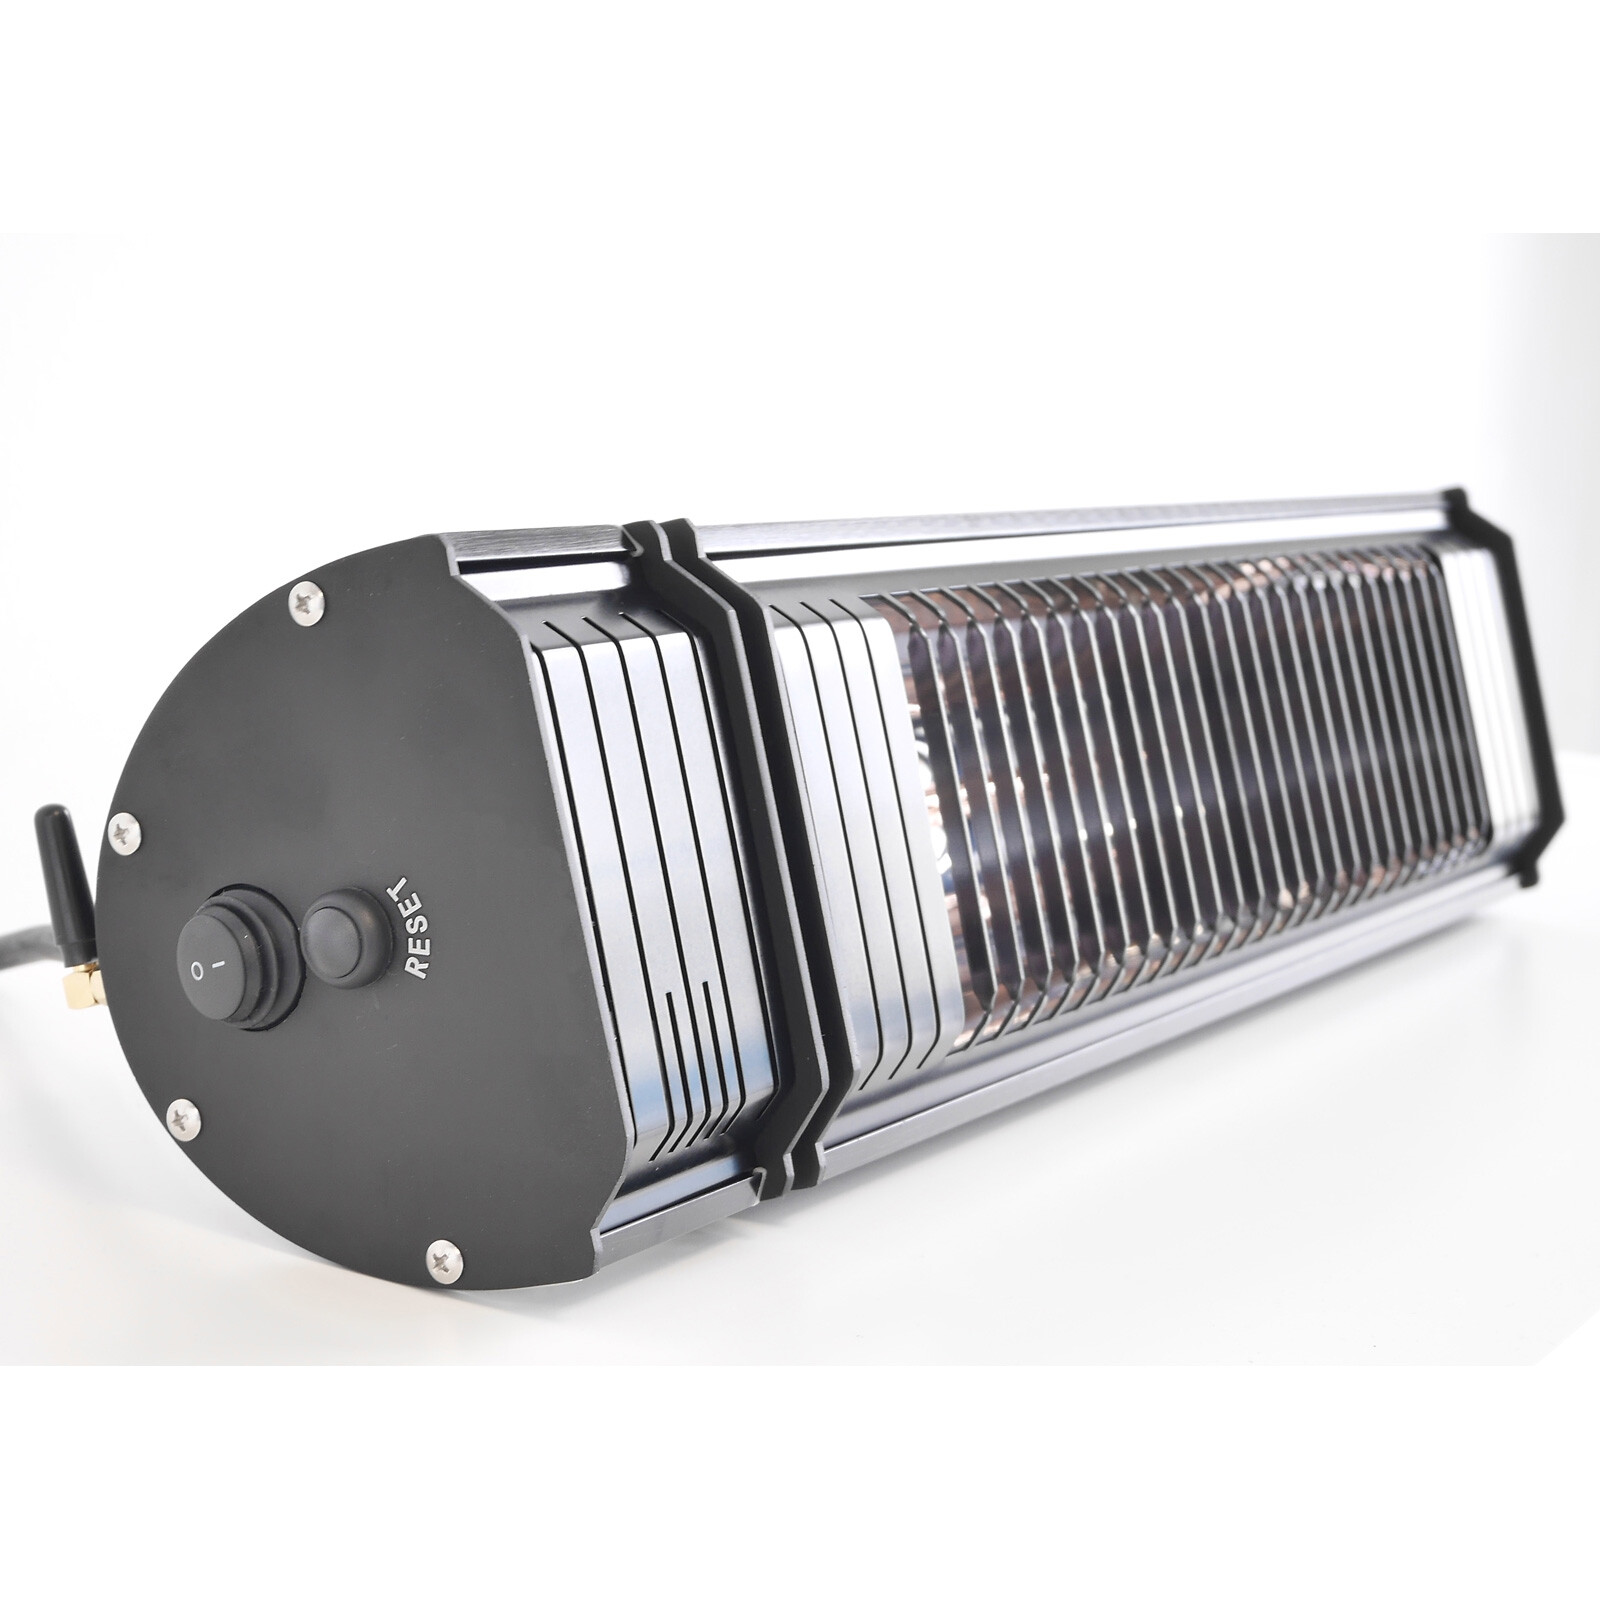 Side view of the Appino 20 infrared patio heater with bluetooth app control turned off